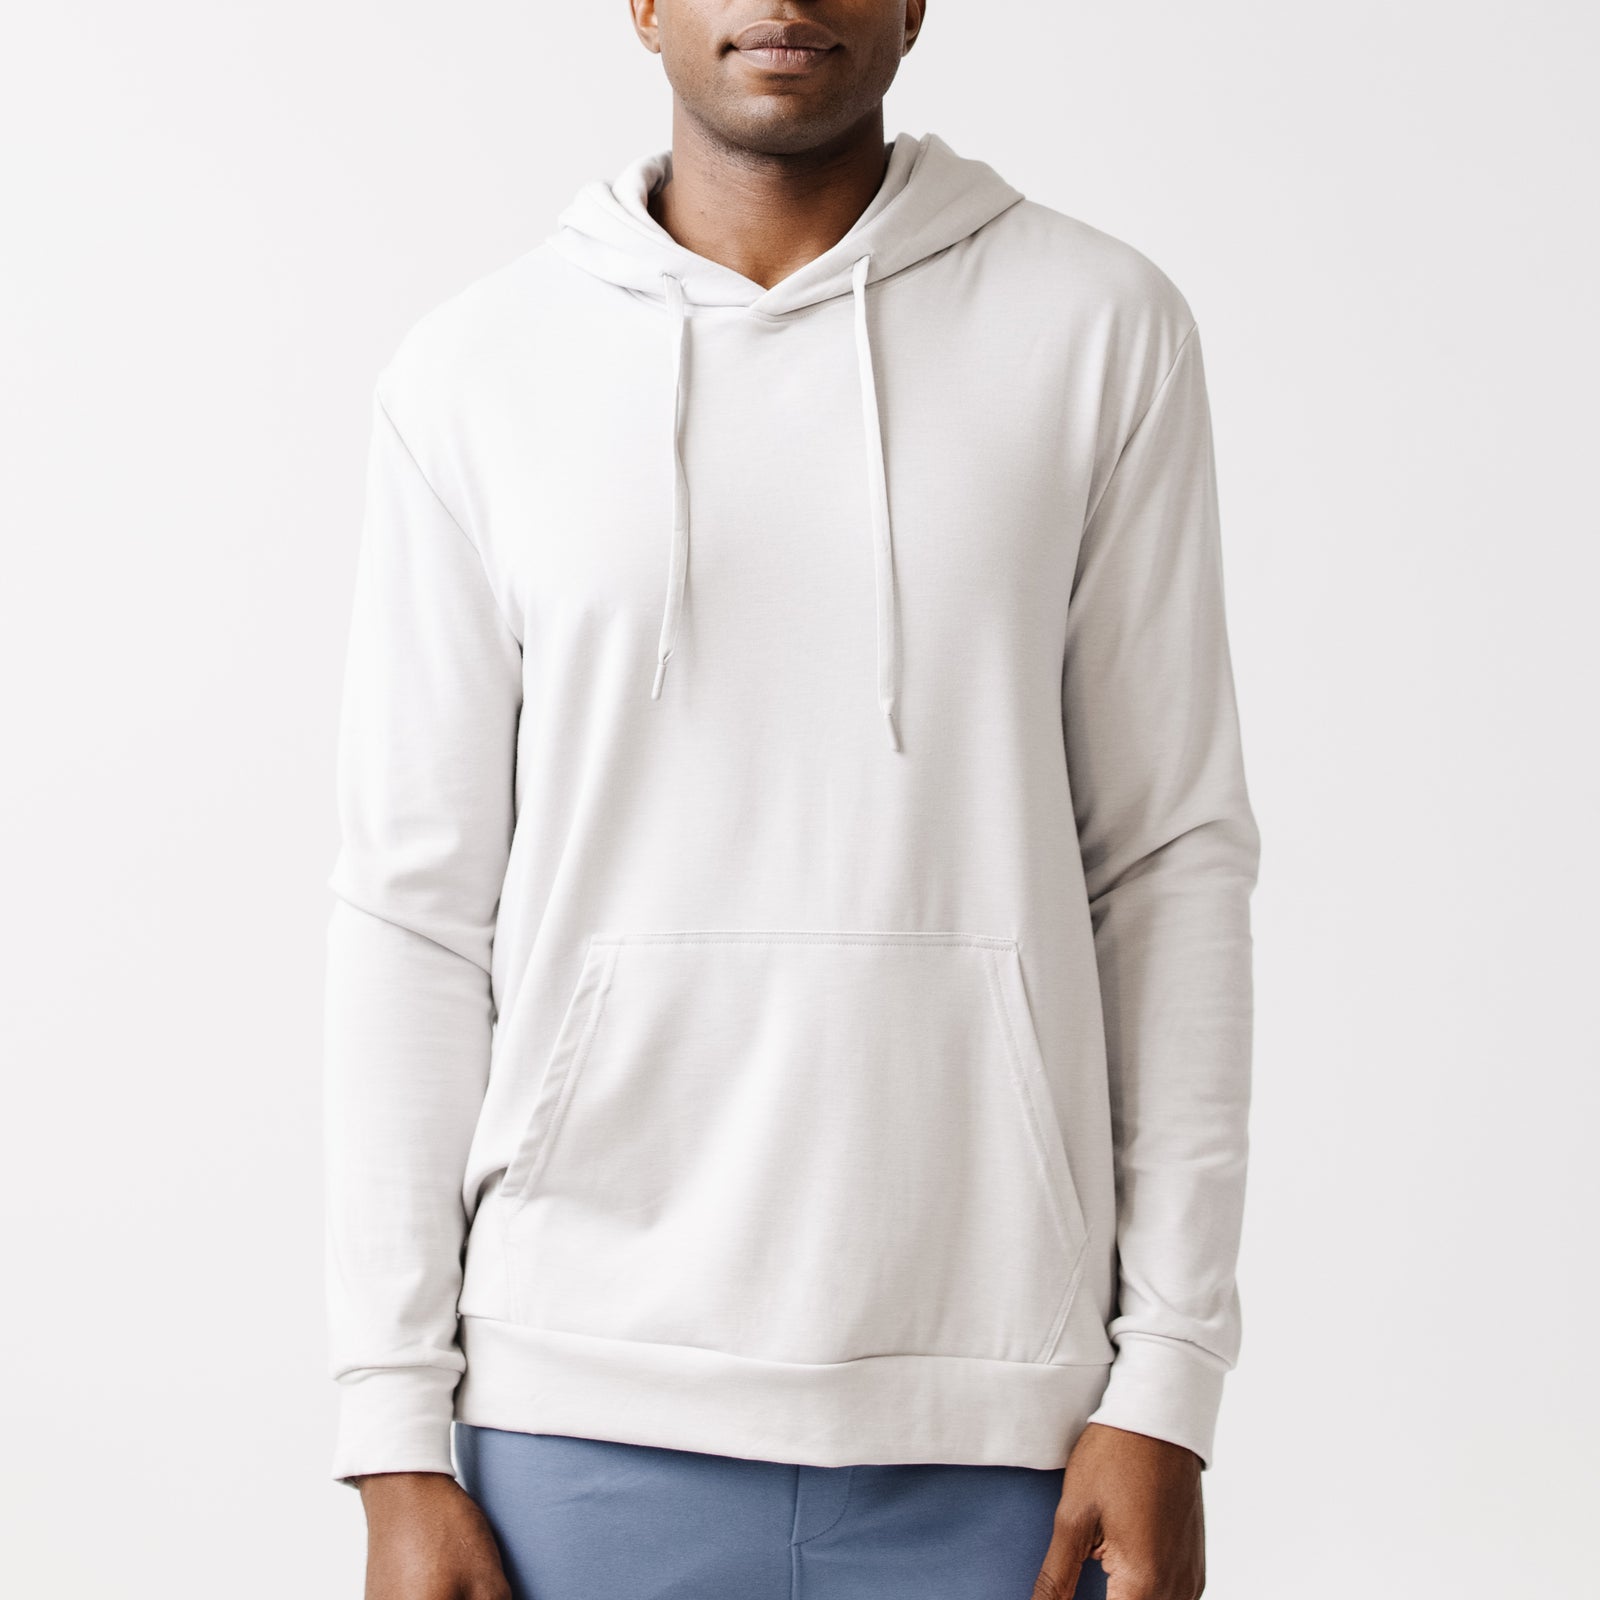 Light Grey Bamboo Hoodie worn by man standing in front of white background.